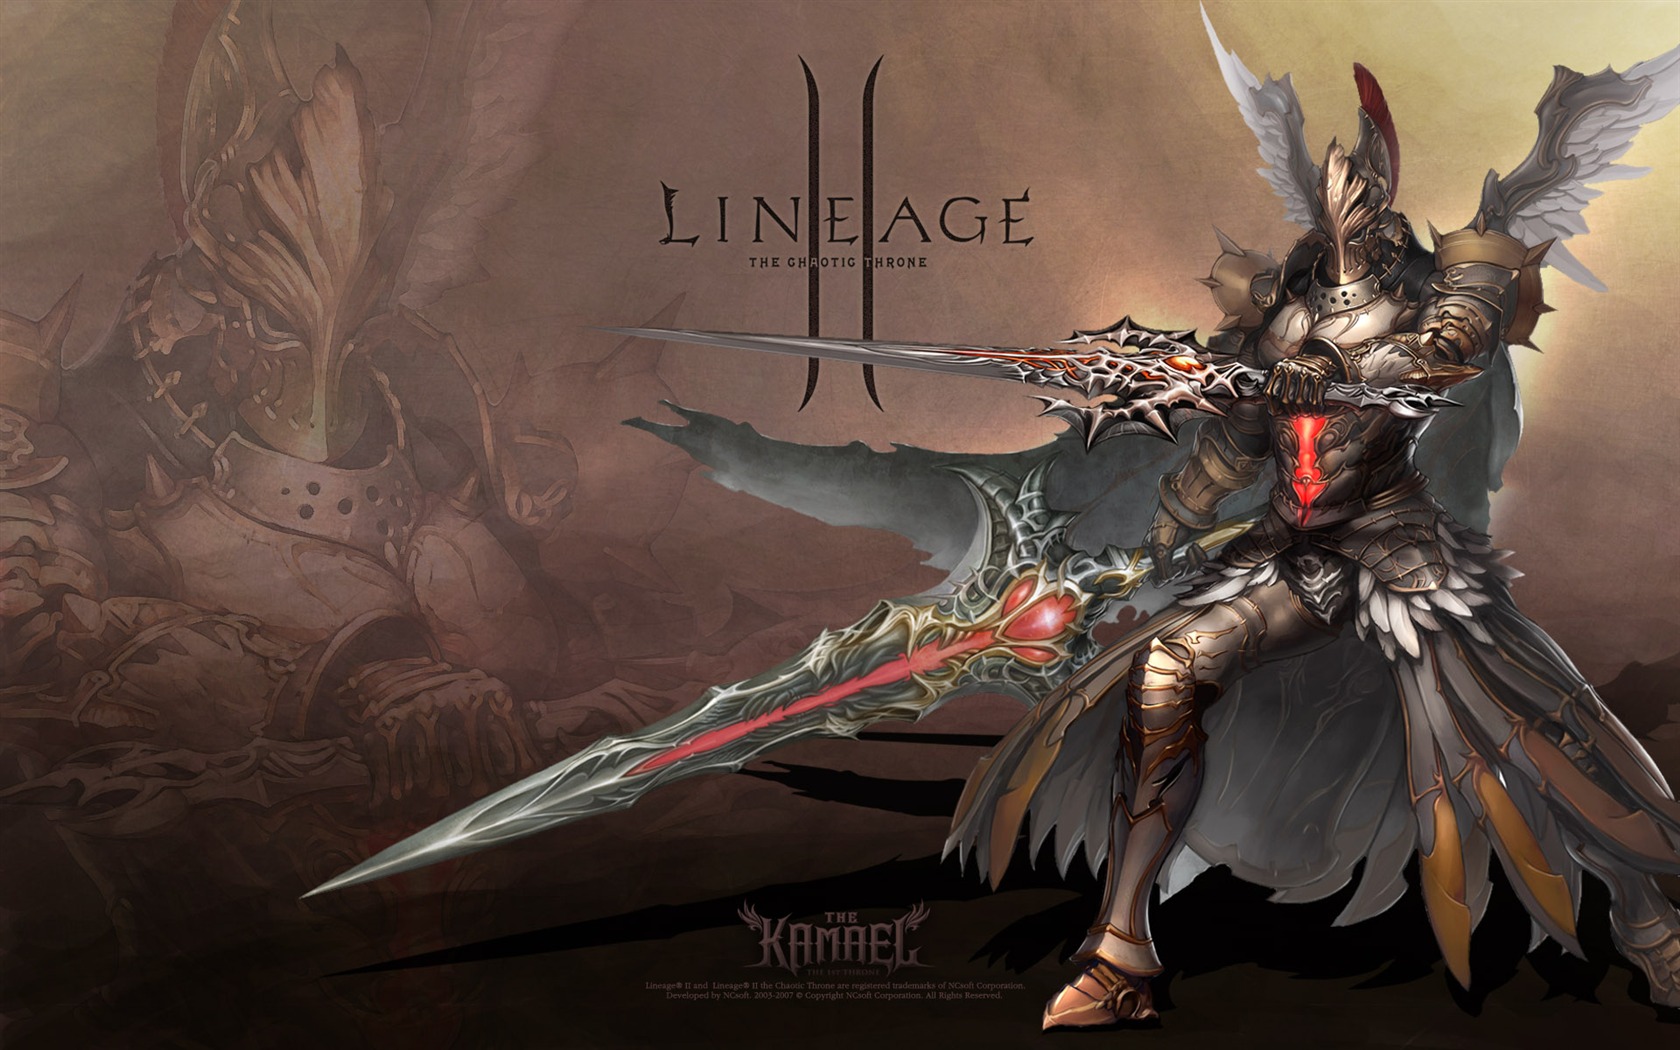 LINEAGE Ⅱ modeling HD gaming wallpapers #9 - 1680x1050